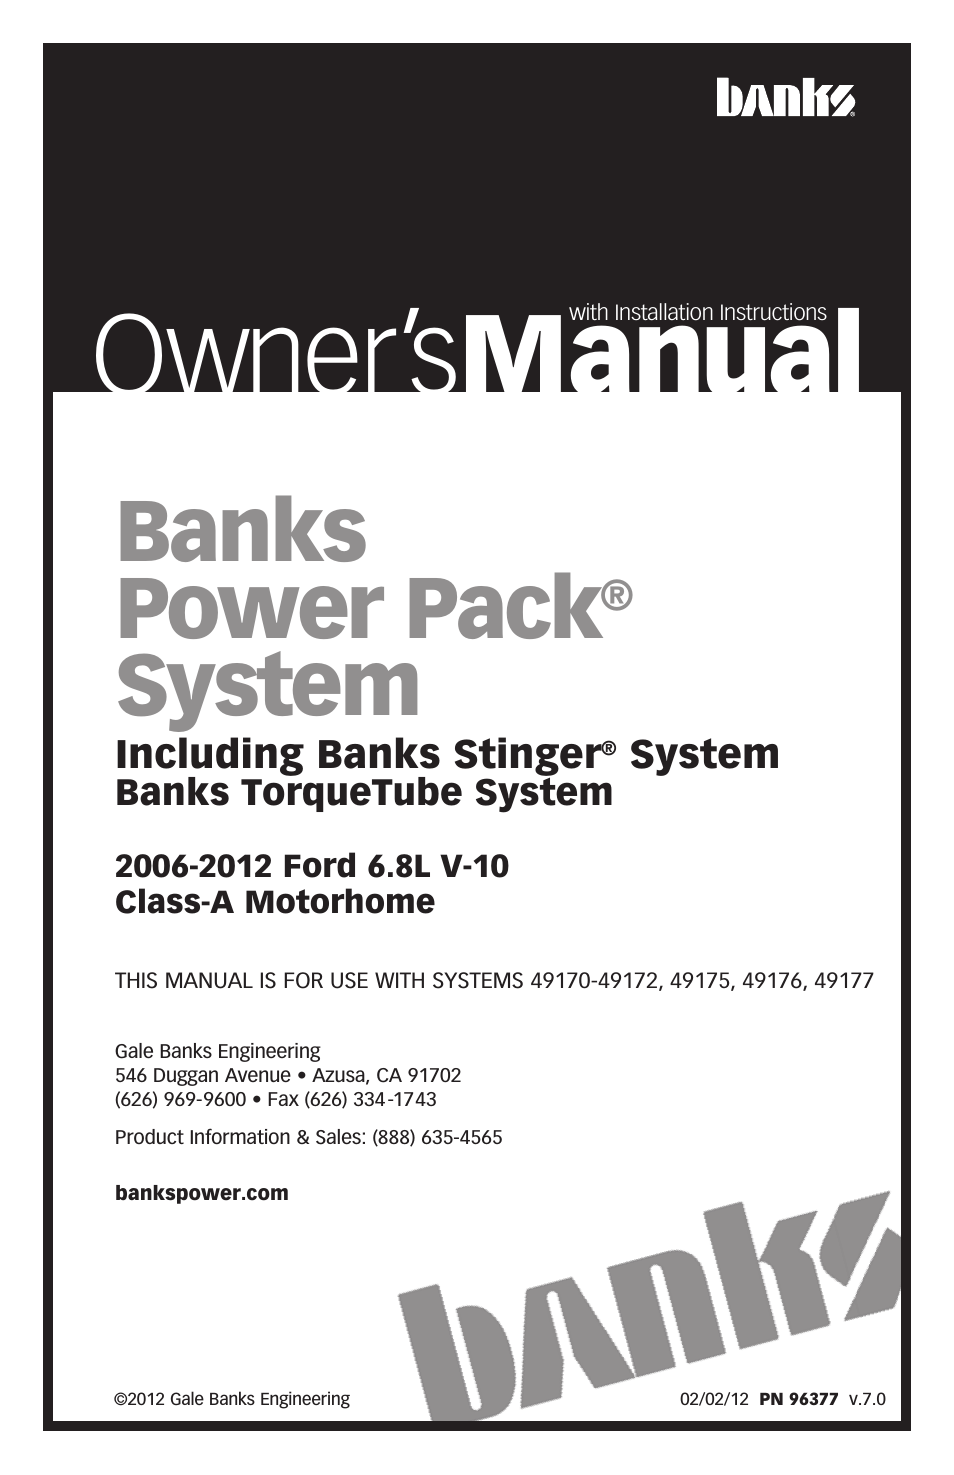 Ford Motorhomes: (Gas ’05 - 14 6.8L V-10, Class-A (30-valve) Power Systems- PowerPack, Stinger & TorqueTube systems, (Class-A) '05-12